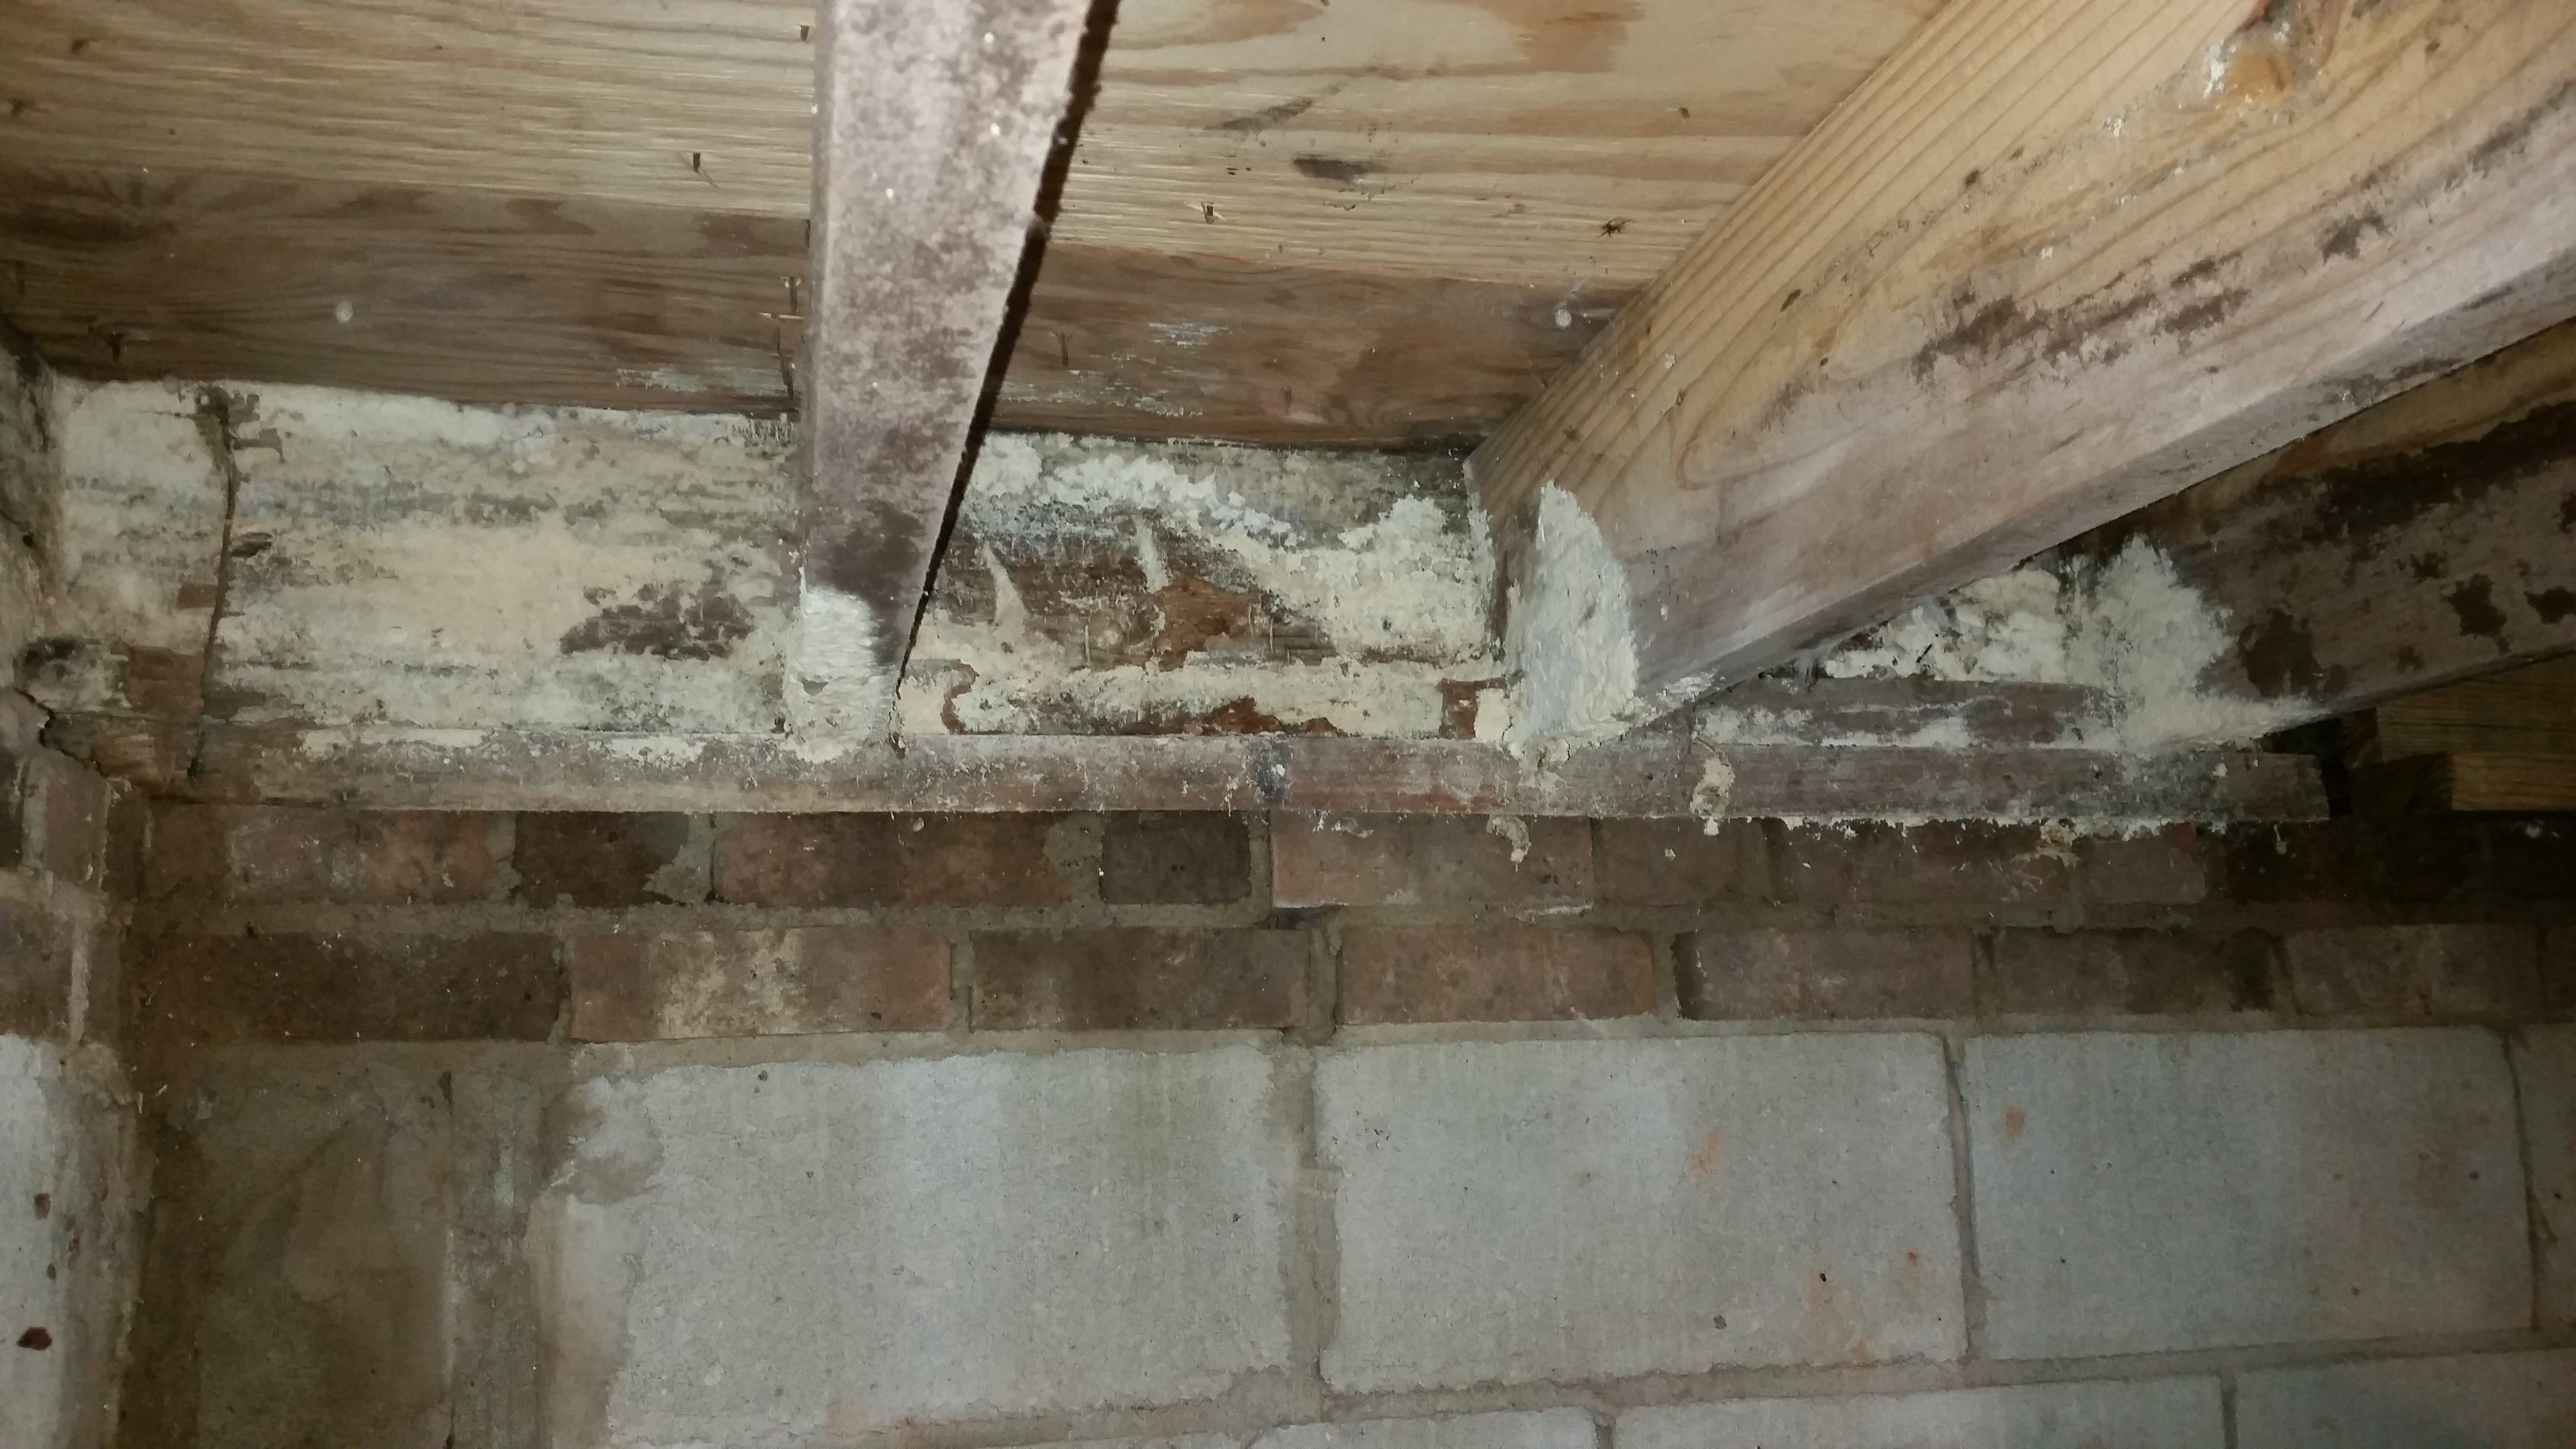 Crawl Space Mold Remediation in Indianapolis